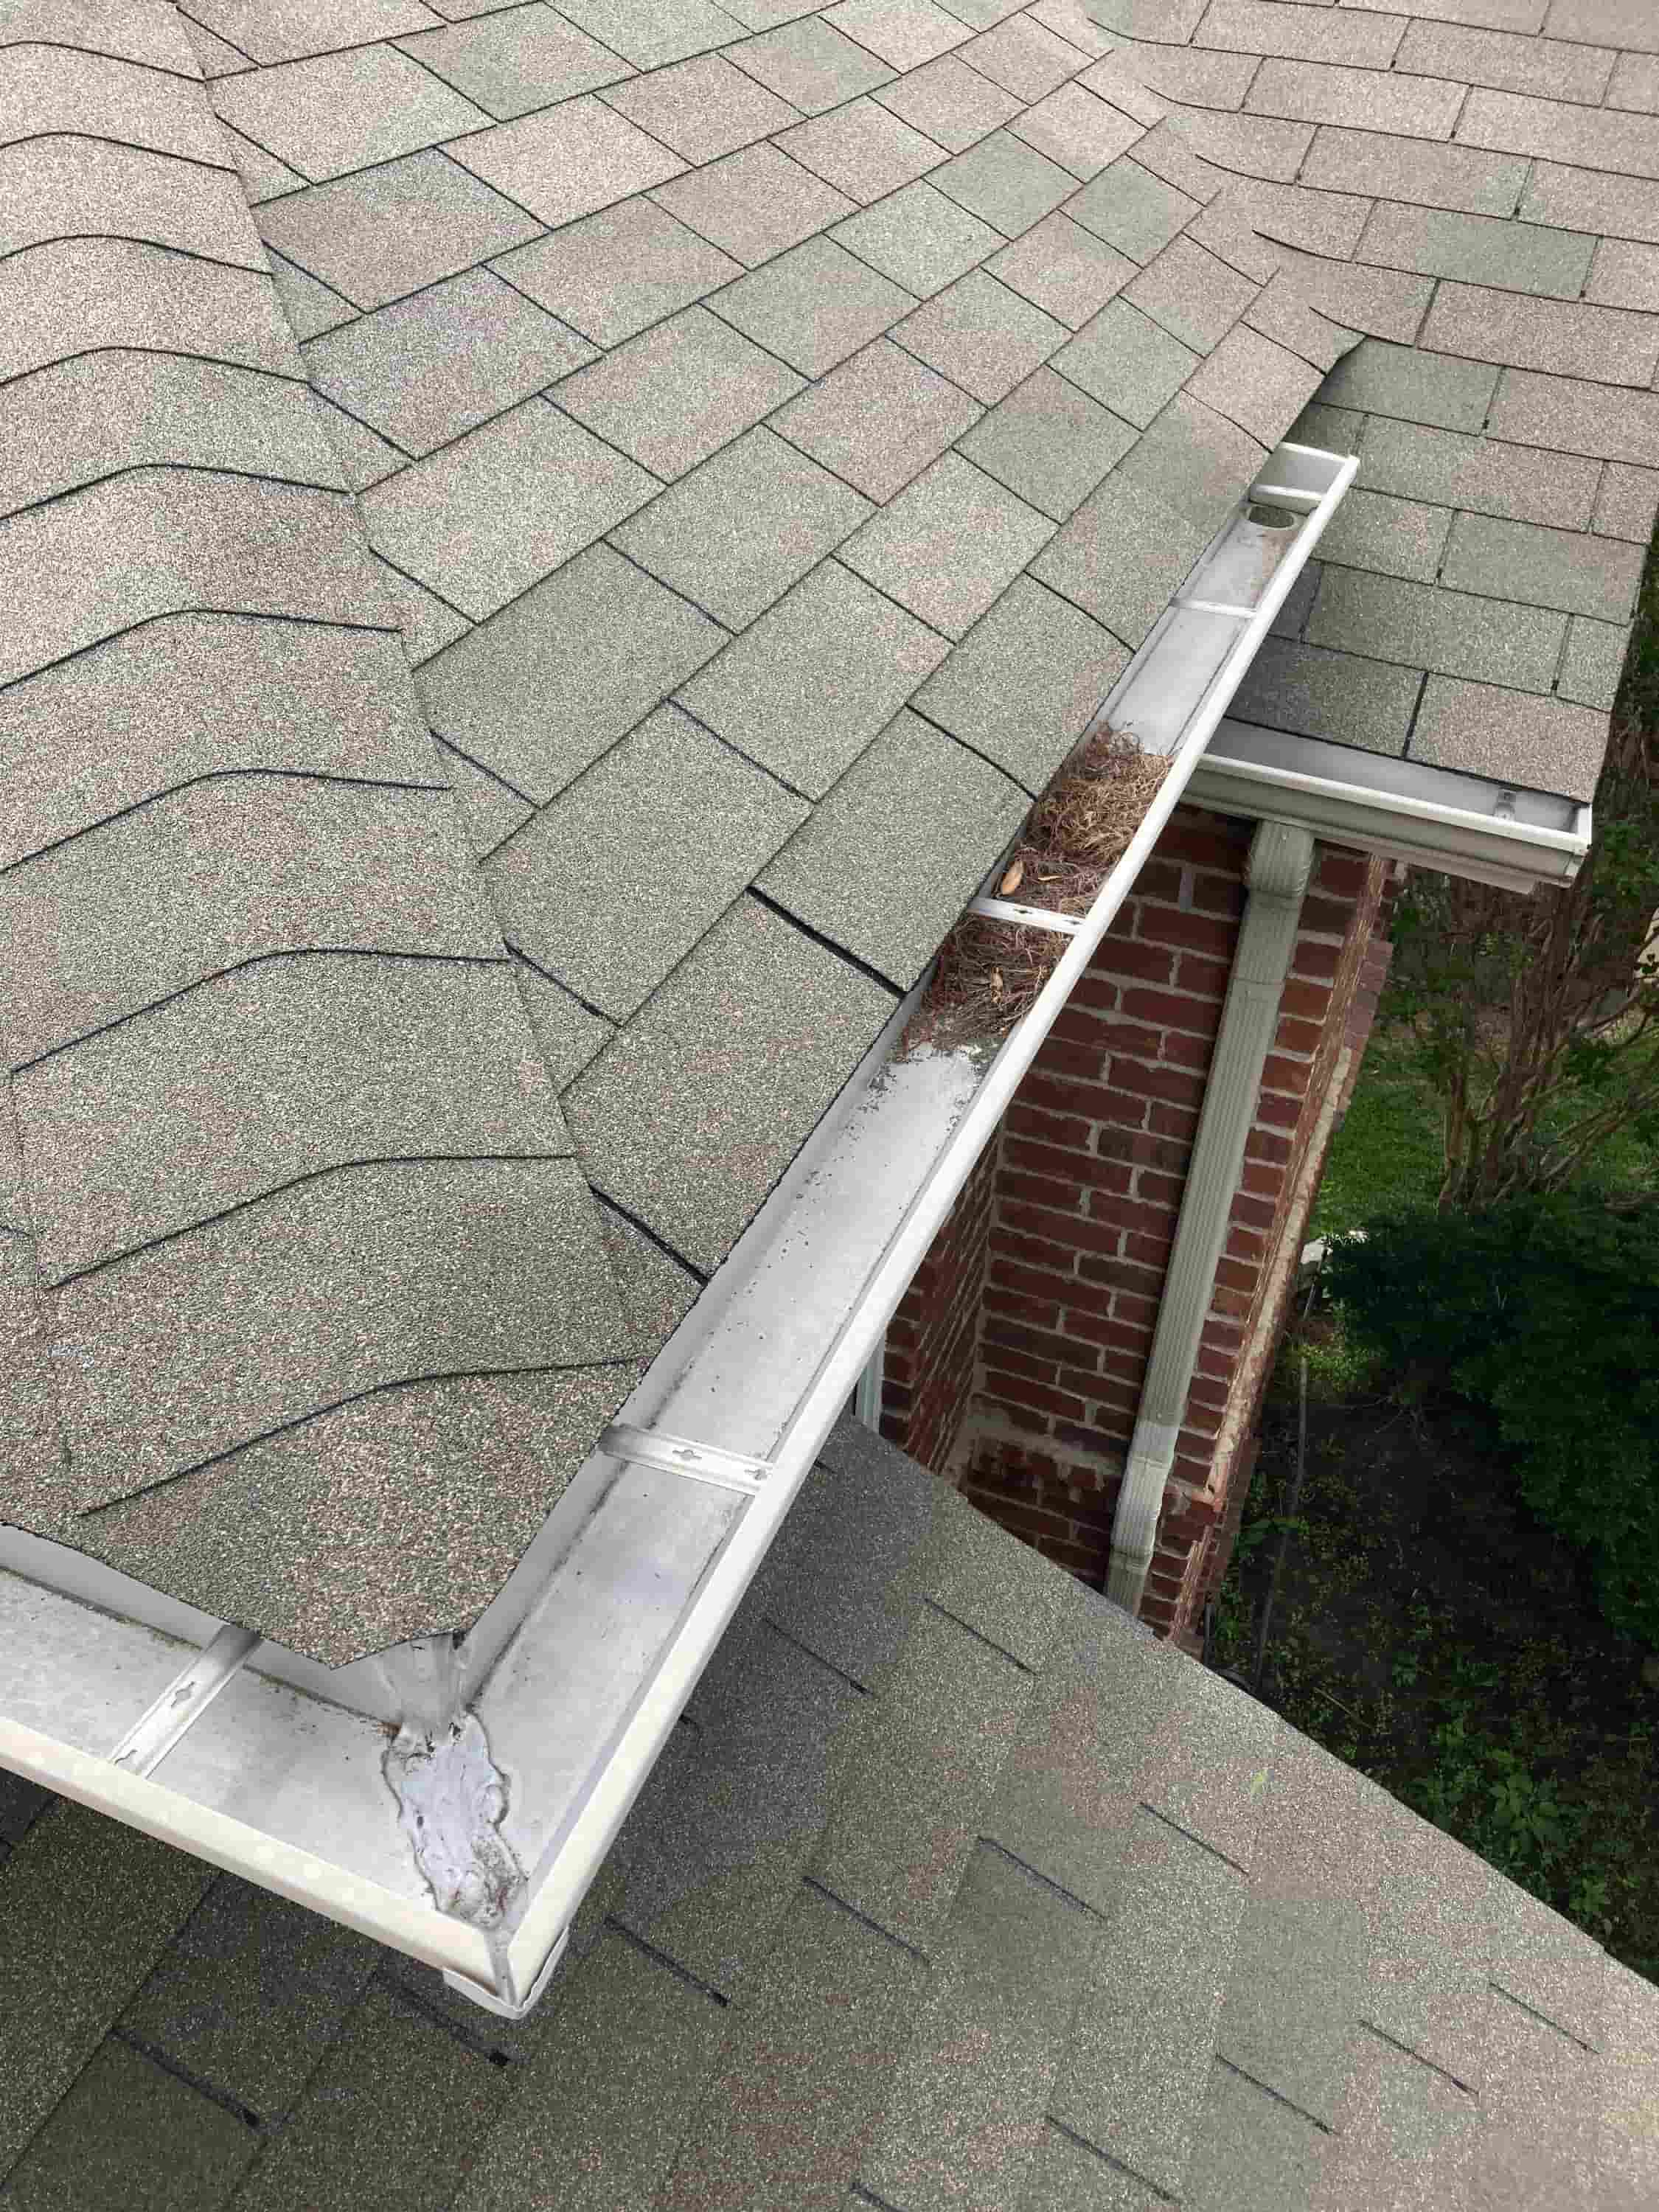 adding gutters